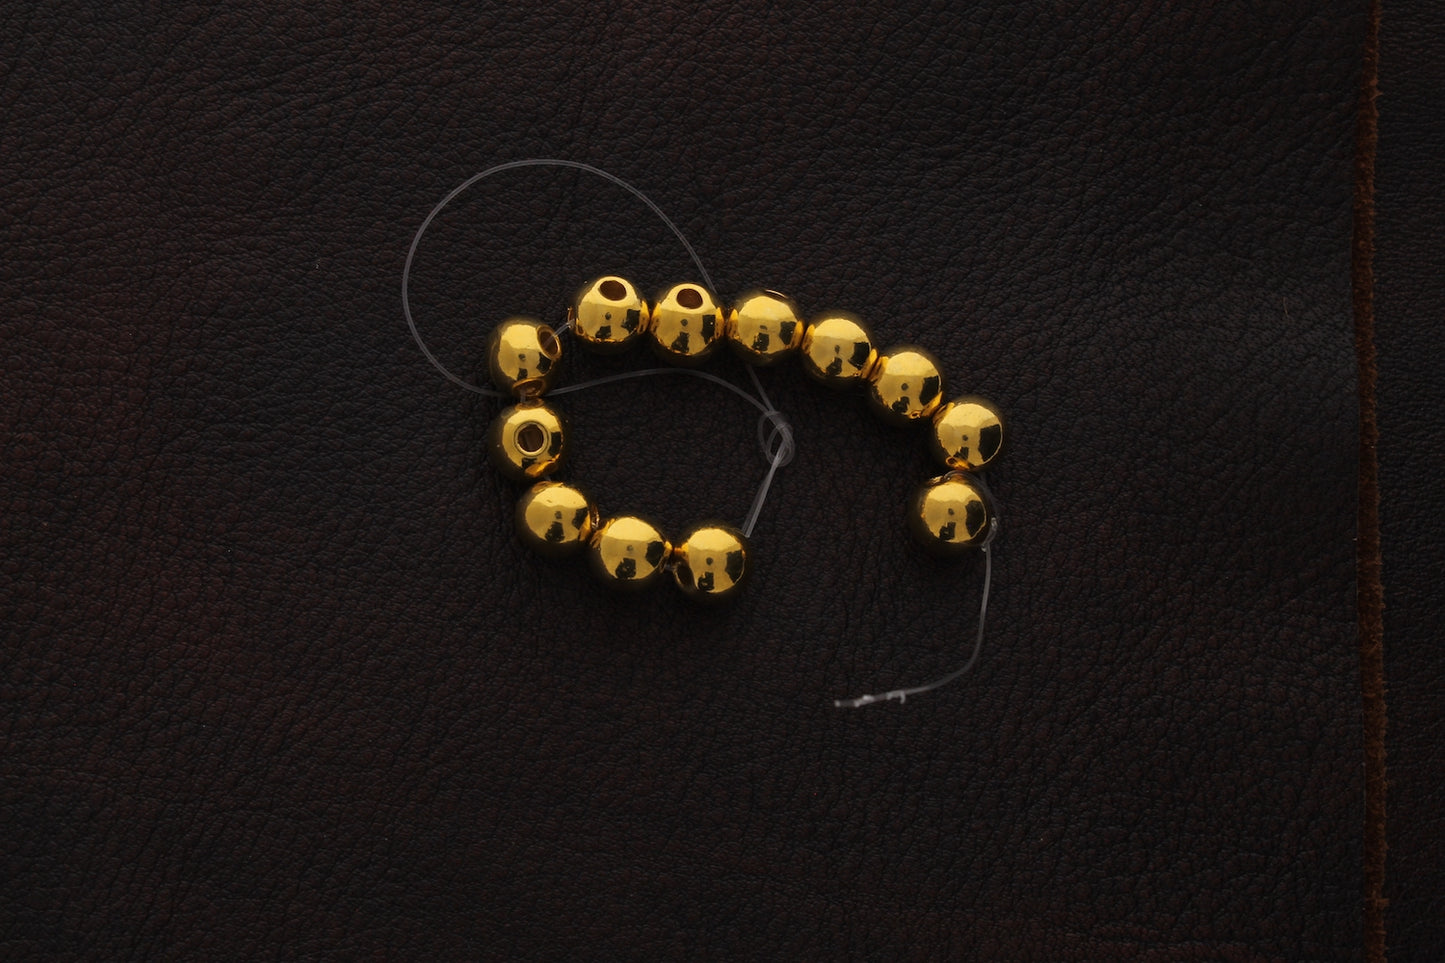 10mm Bright Gold Finish, 3 hole bead, 12 each